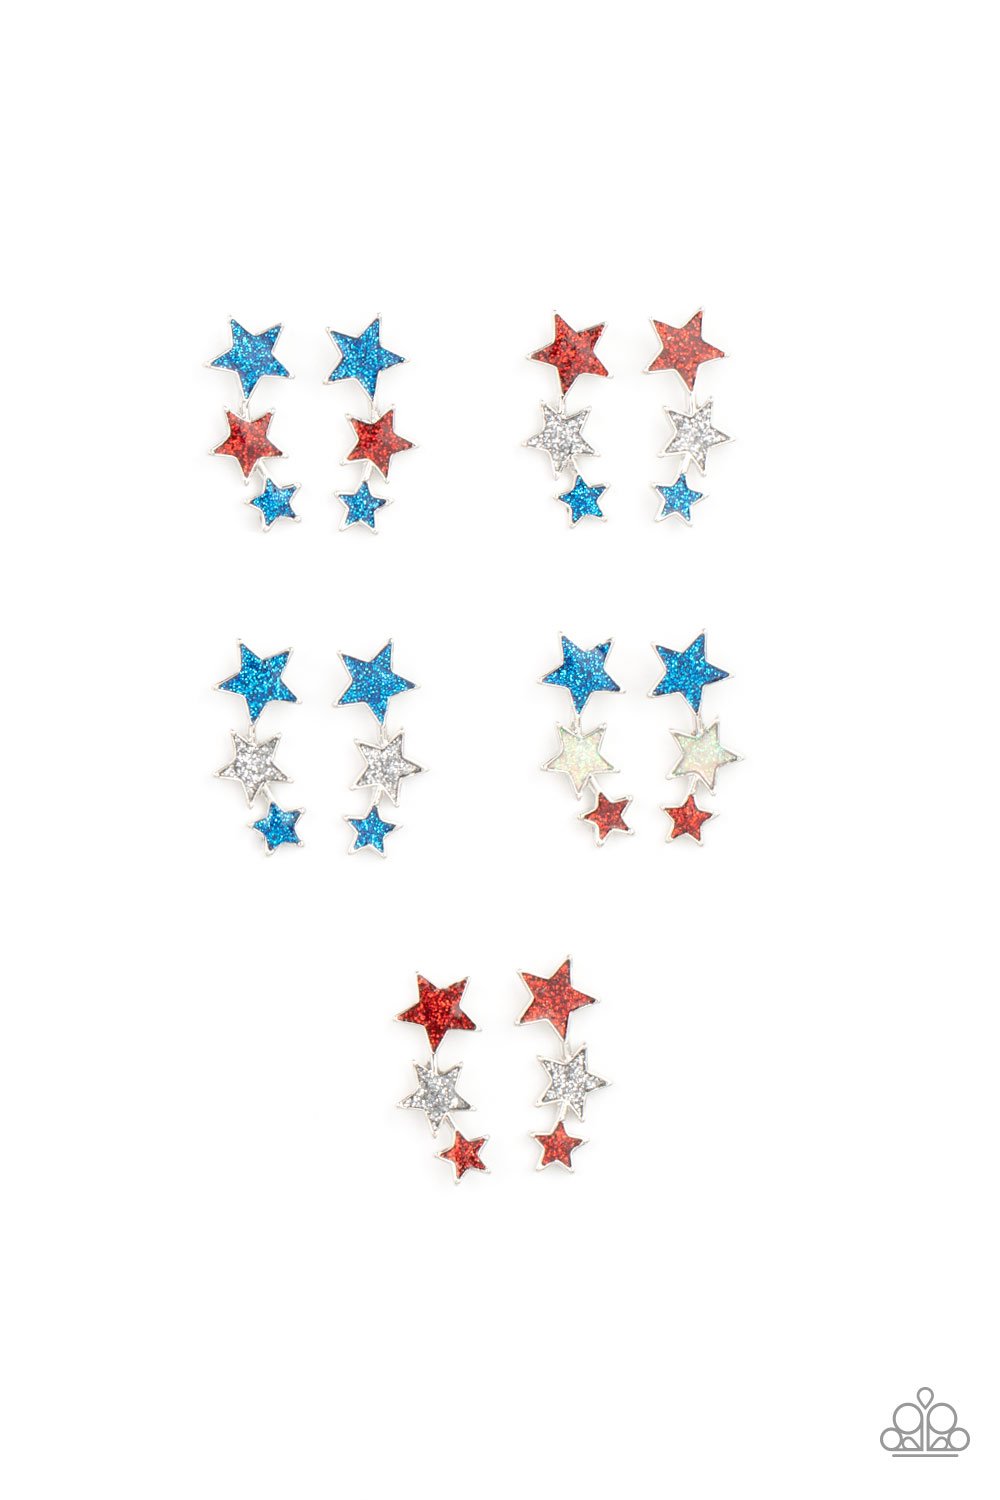 Let freedom ring with these red, white and blue iridescent stars. Earrings attach to standard post-back fittings.  SOLD AS A PACK PAIRS OF ASSORTED EARRINGS OF 5 FOR $5 (One of each style pictured)!